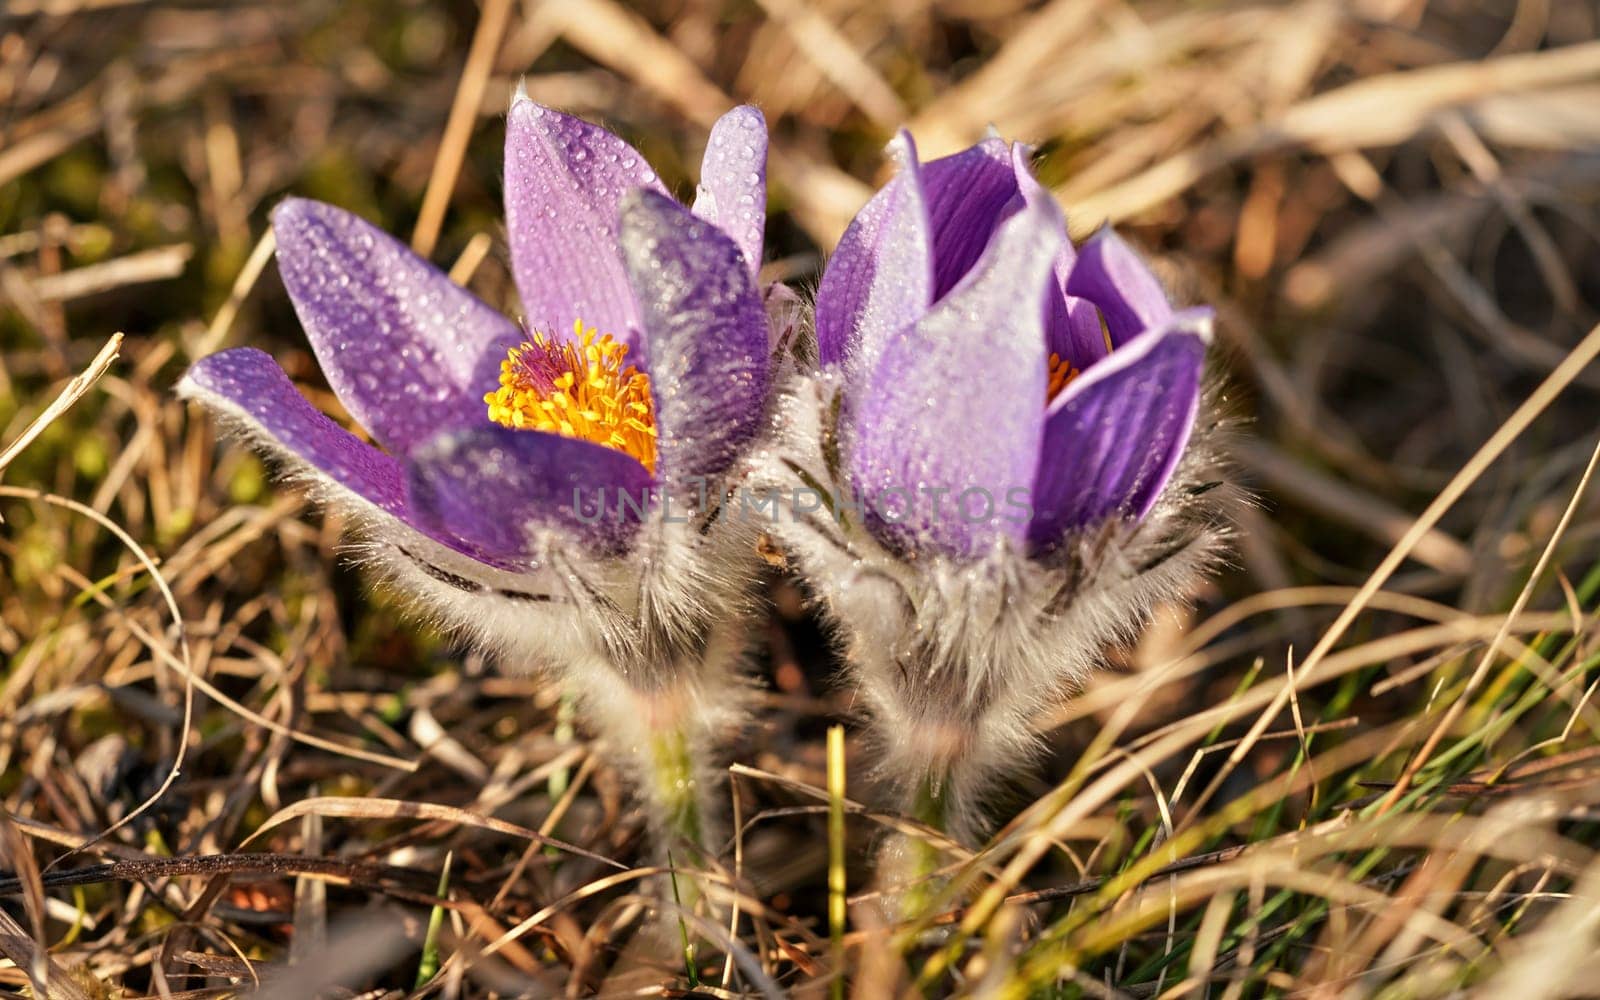 Purple / Violet greater pasque flower - Pulsatilla grandis - growing in dry grass, sun shines on petals, close up detail
